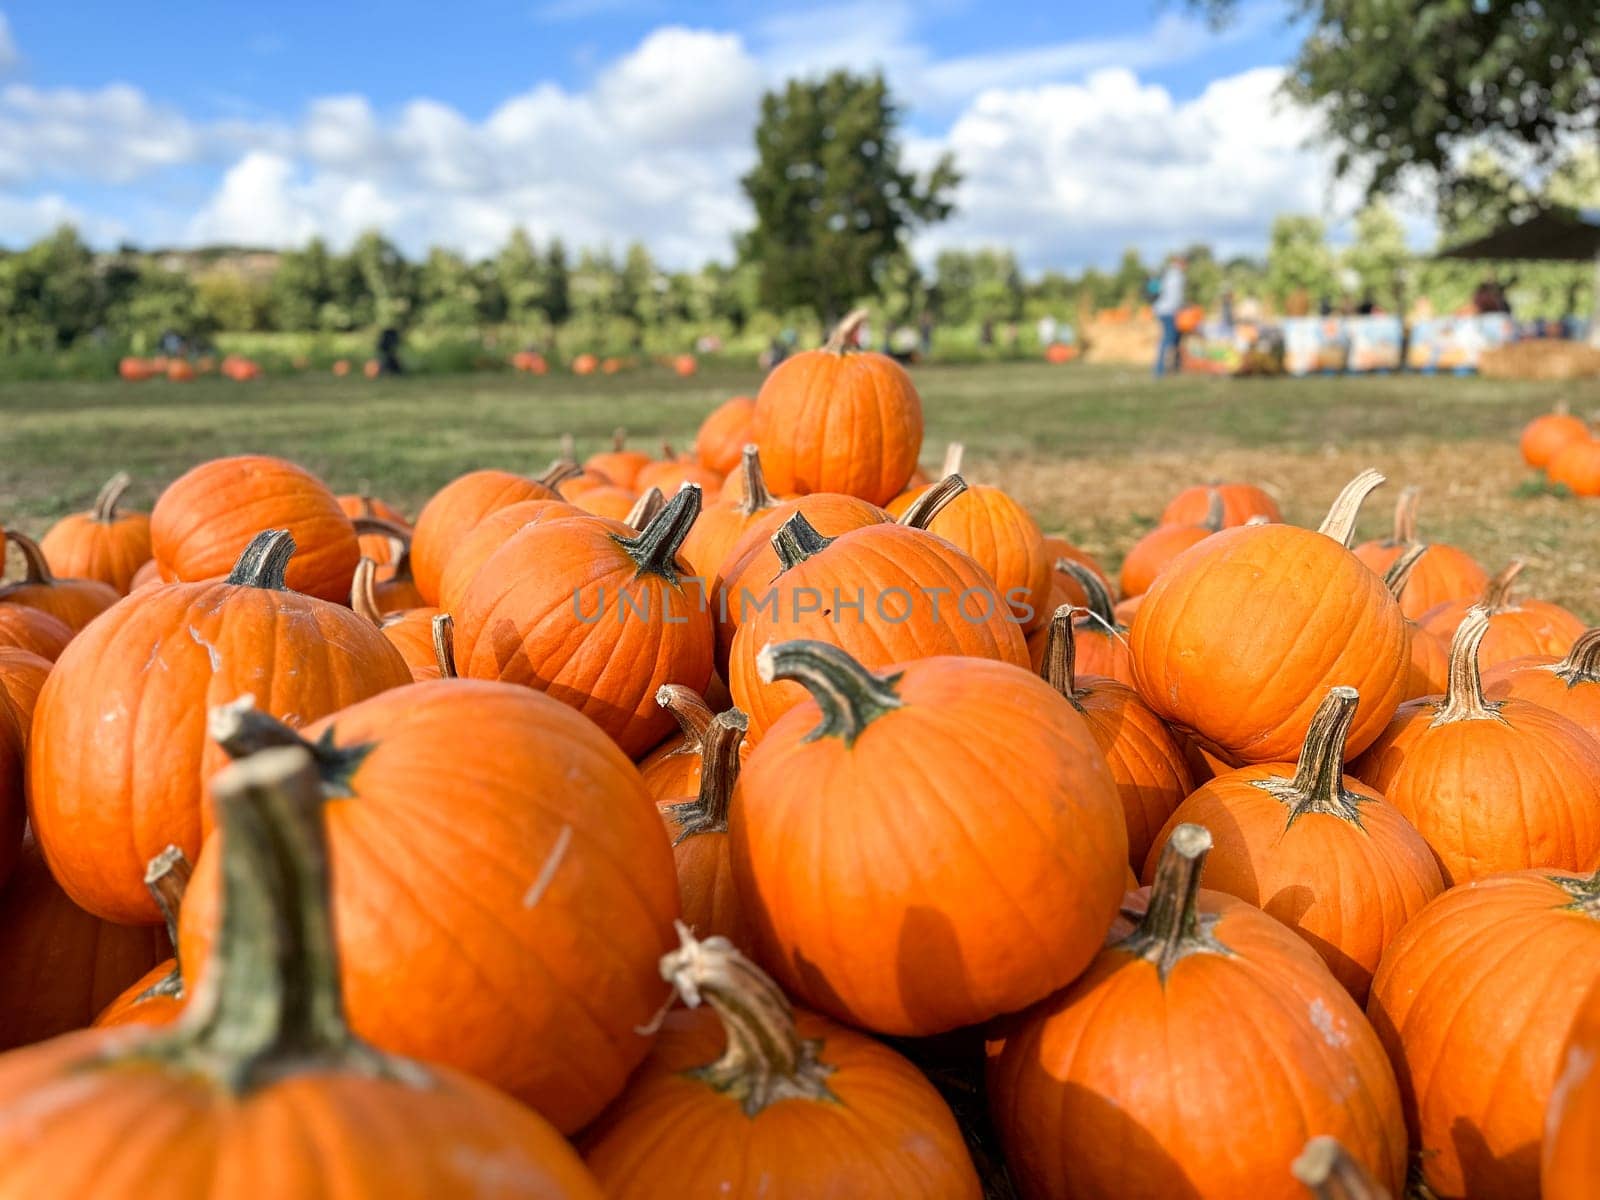 Pumpkins in the field during harvest time in fall. Halloween preparation by Bonandbon